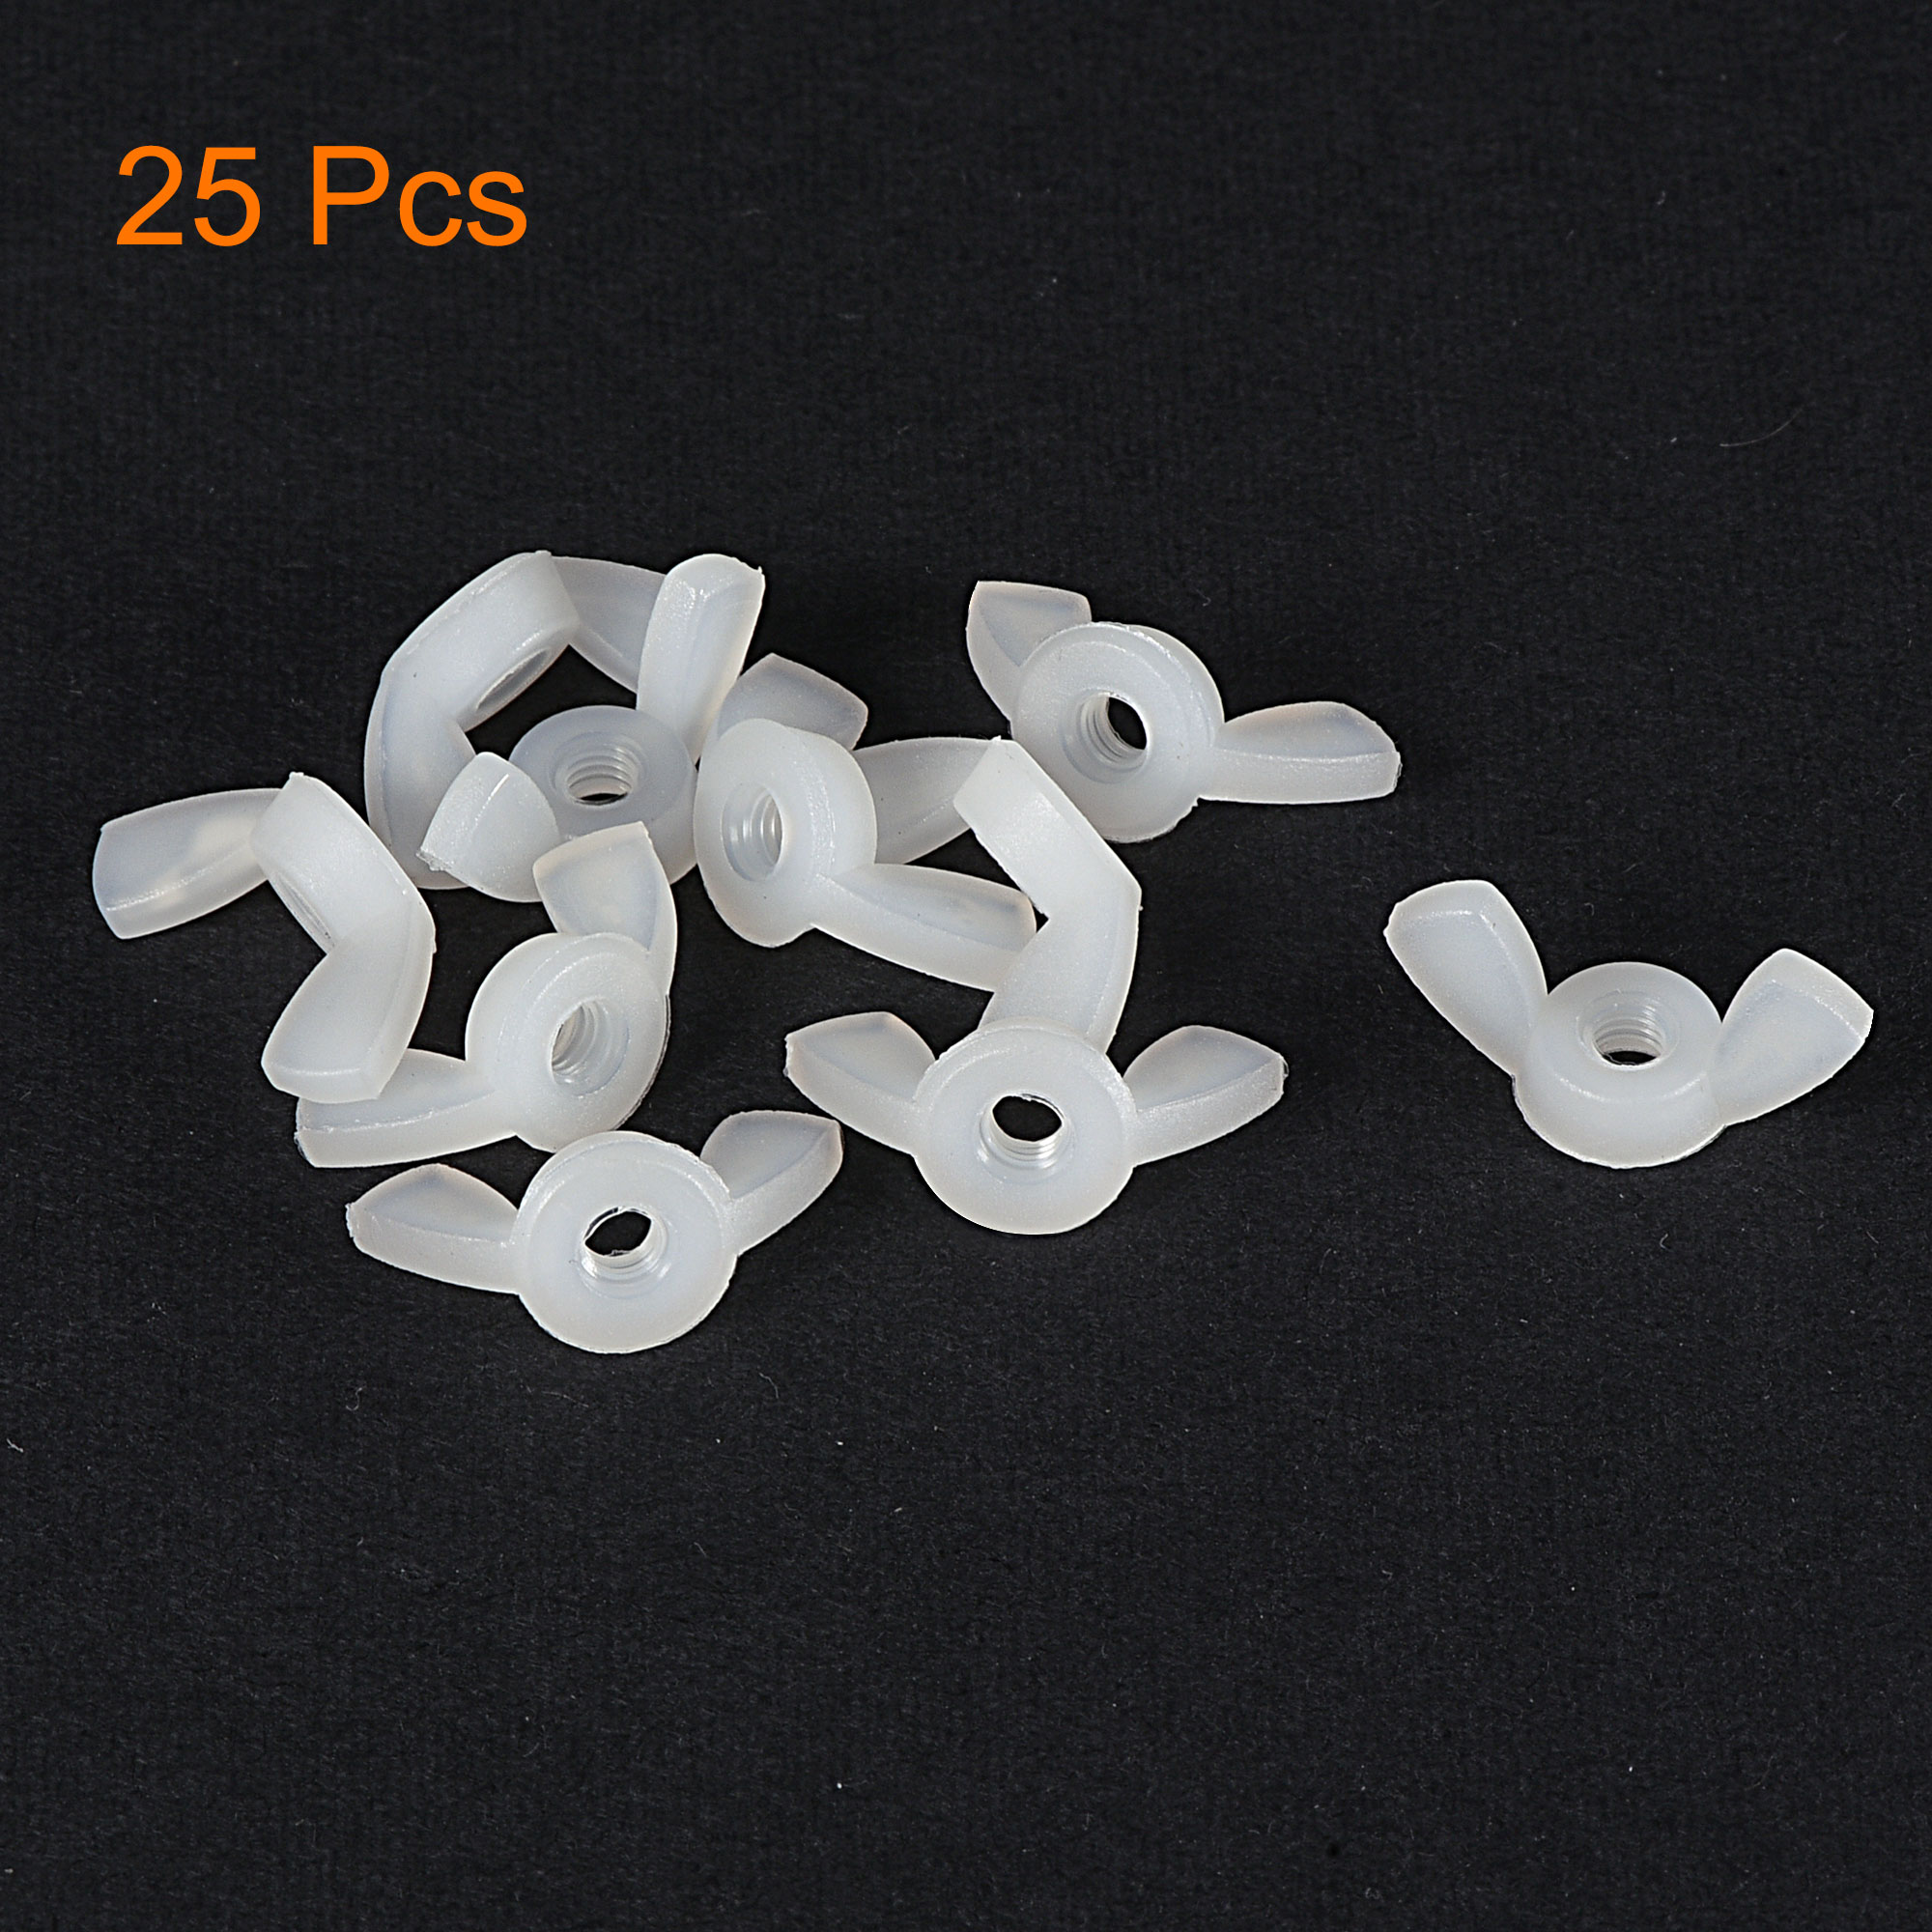 Uxcell M3 Wing Nuts Butterfly Nut Nylon  Hand Twist Tighten Fasteners White 25 Pack - image 3 of 5